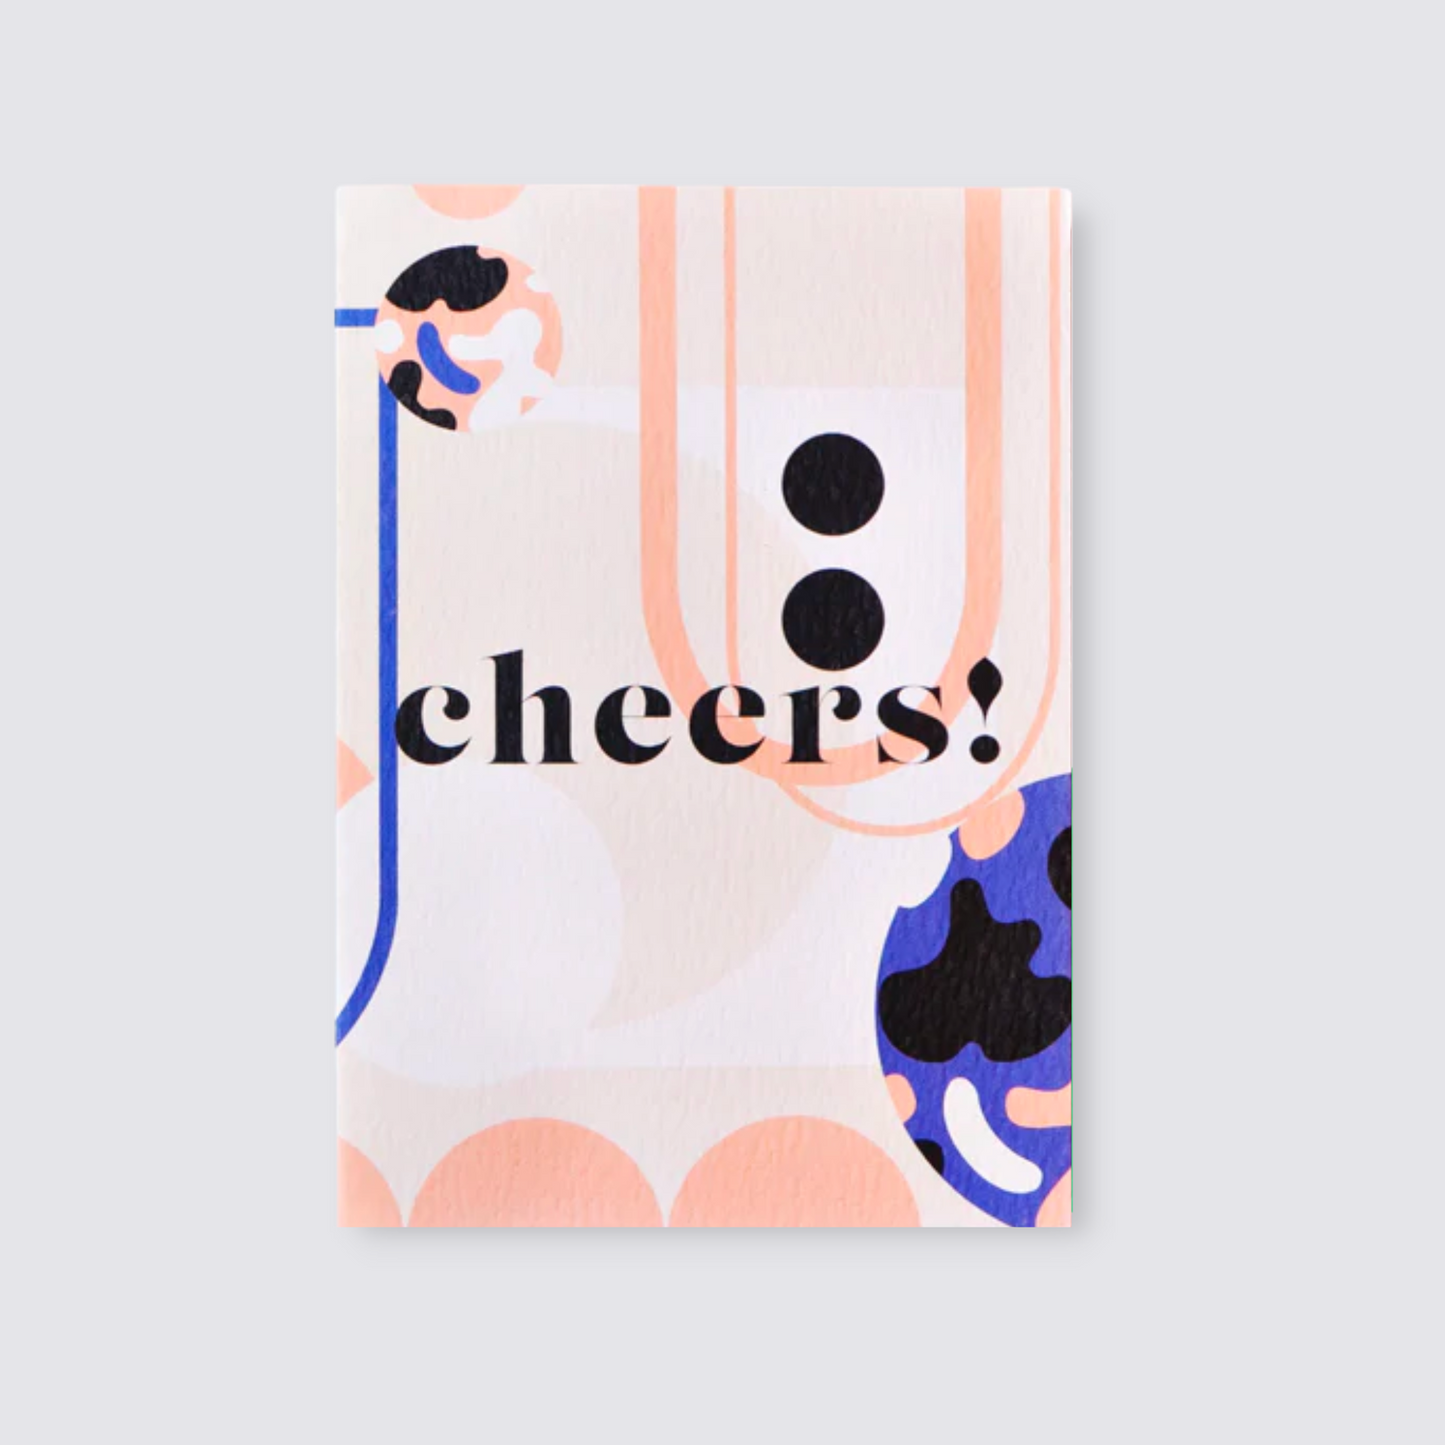 Arches Cheers Cards